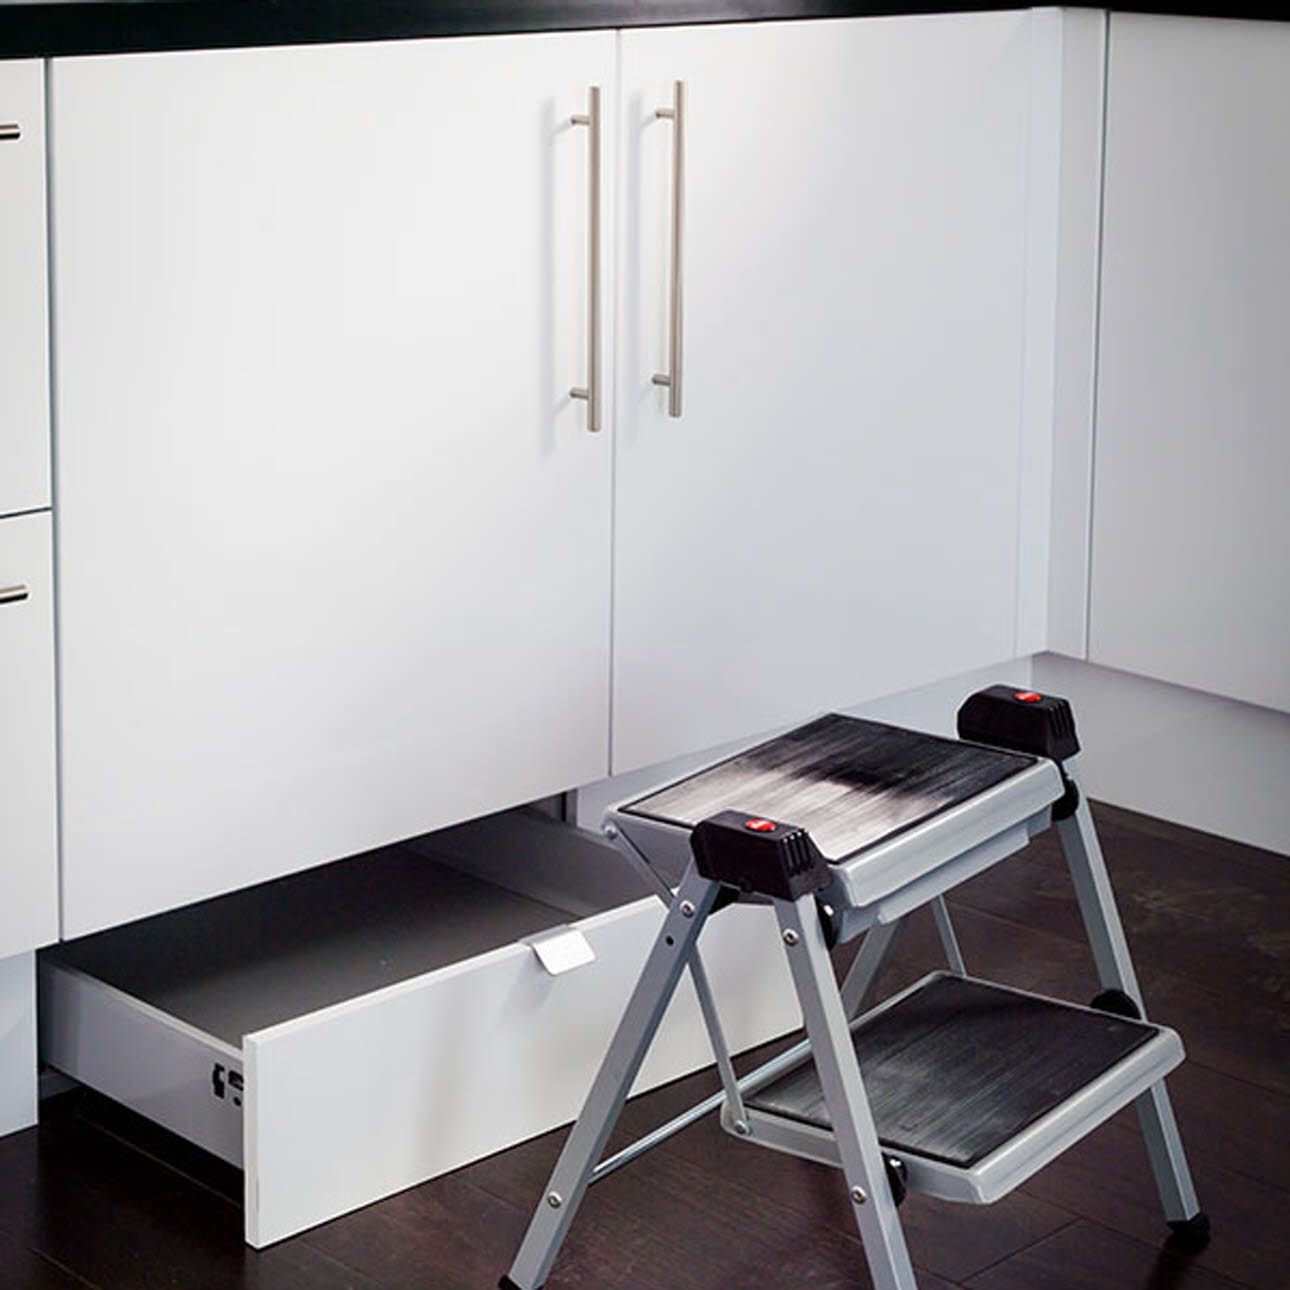 Smarter Ideas For Better Kitchens Throughout Plinth Drawer (View 5 of 15)